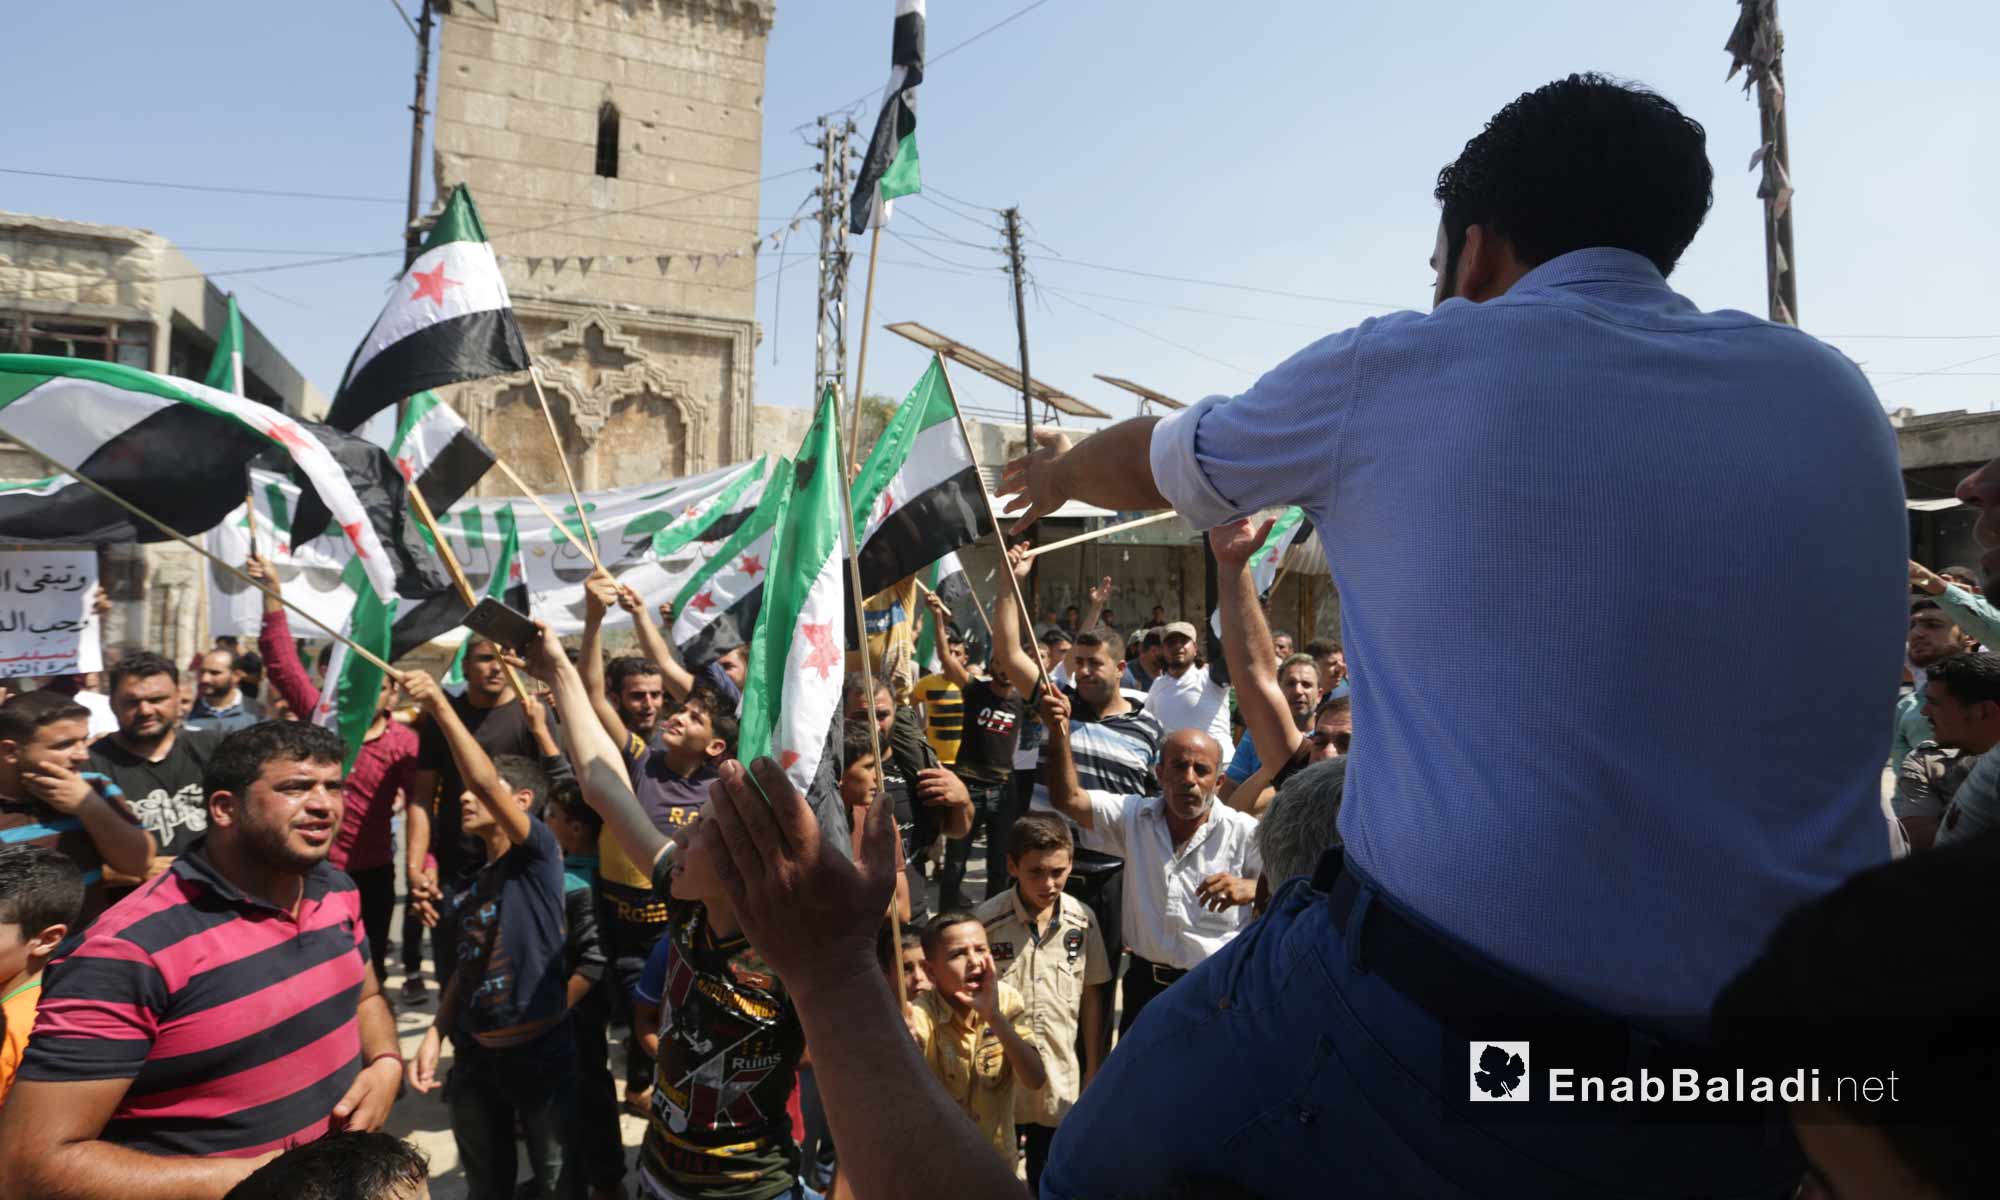 People in Ma`arat al-Nu`man, rural Idlib, protesting against the Sochi deal and demanding the ousting of the Syrian regime – September 6, 2019 (Enab Baladi) 